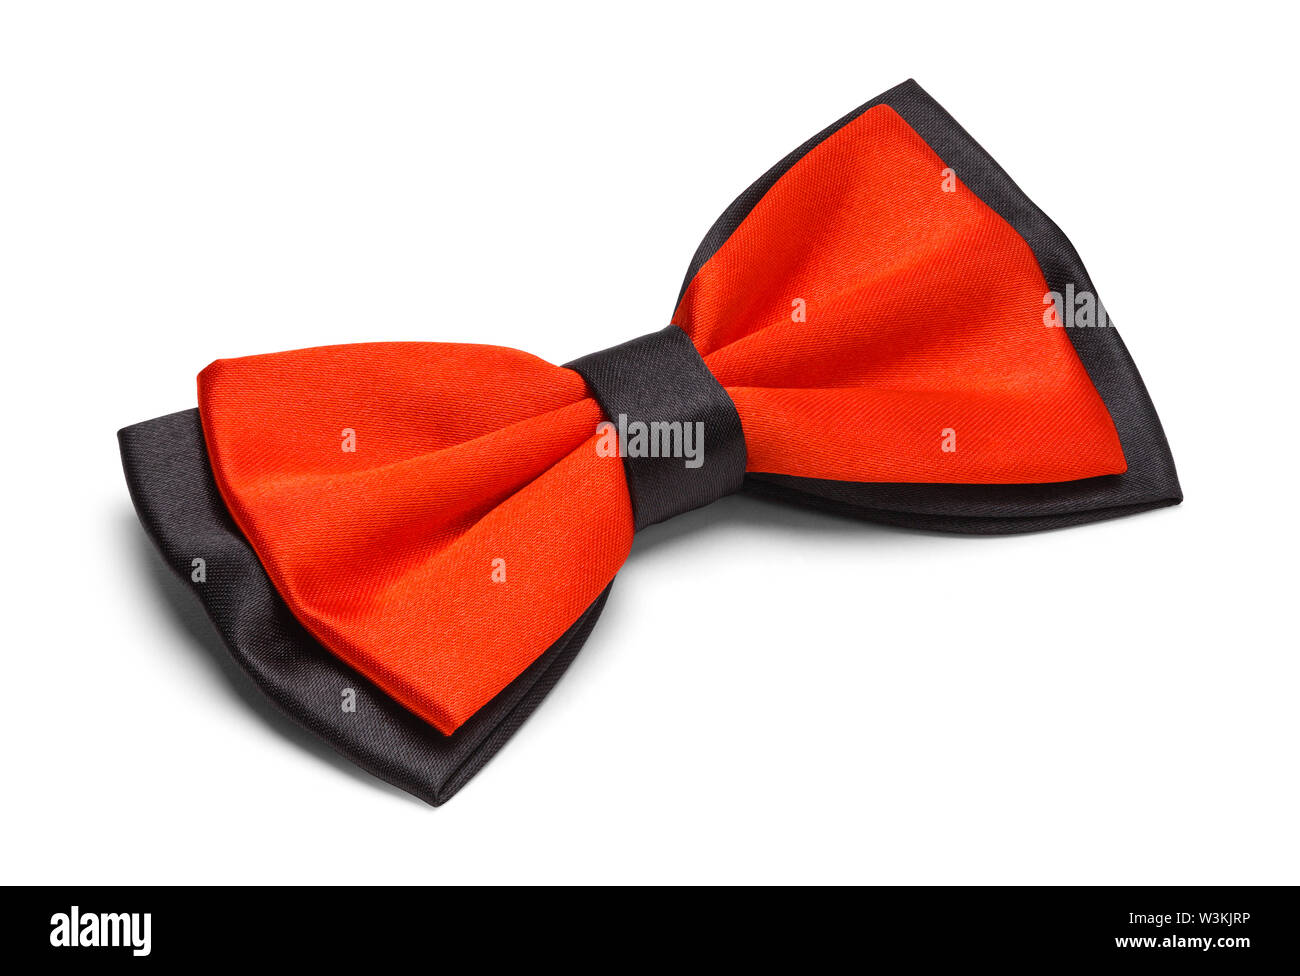 Red and Black Bow Tie Isolated on White Background. Stock Photo